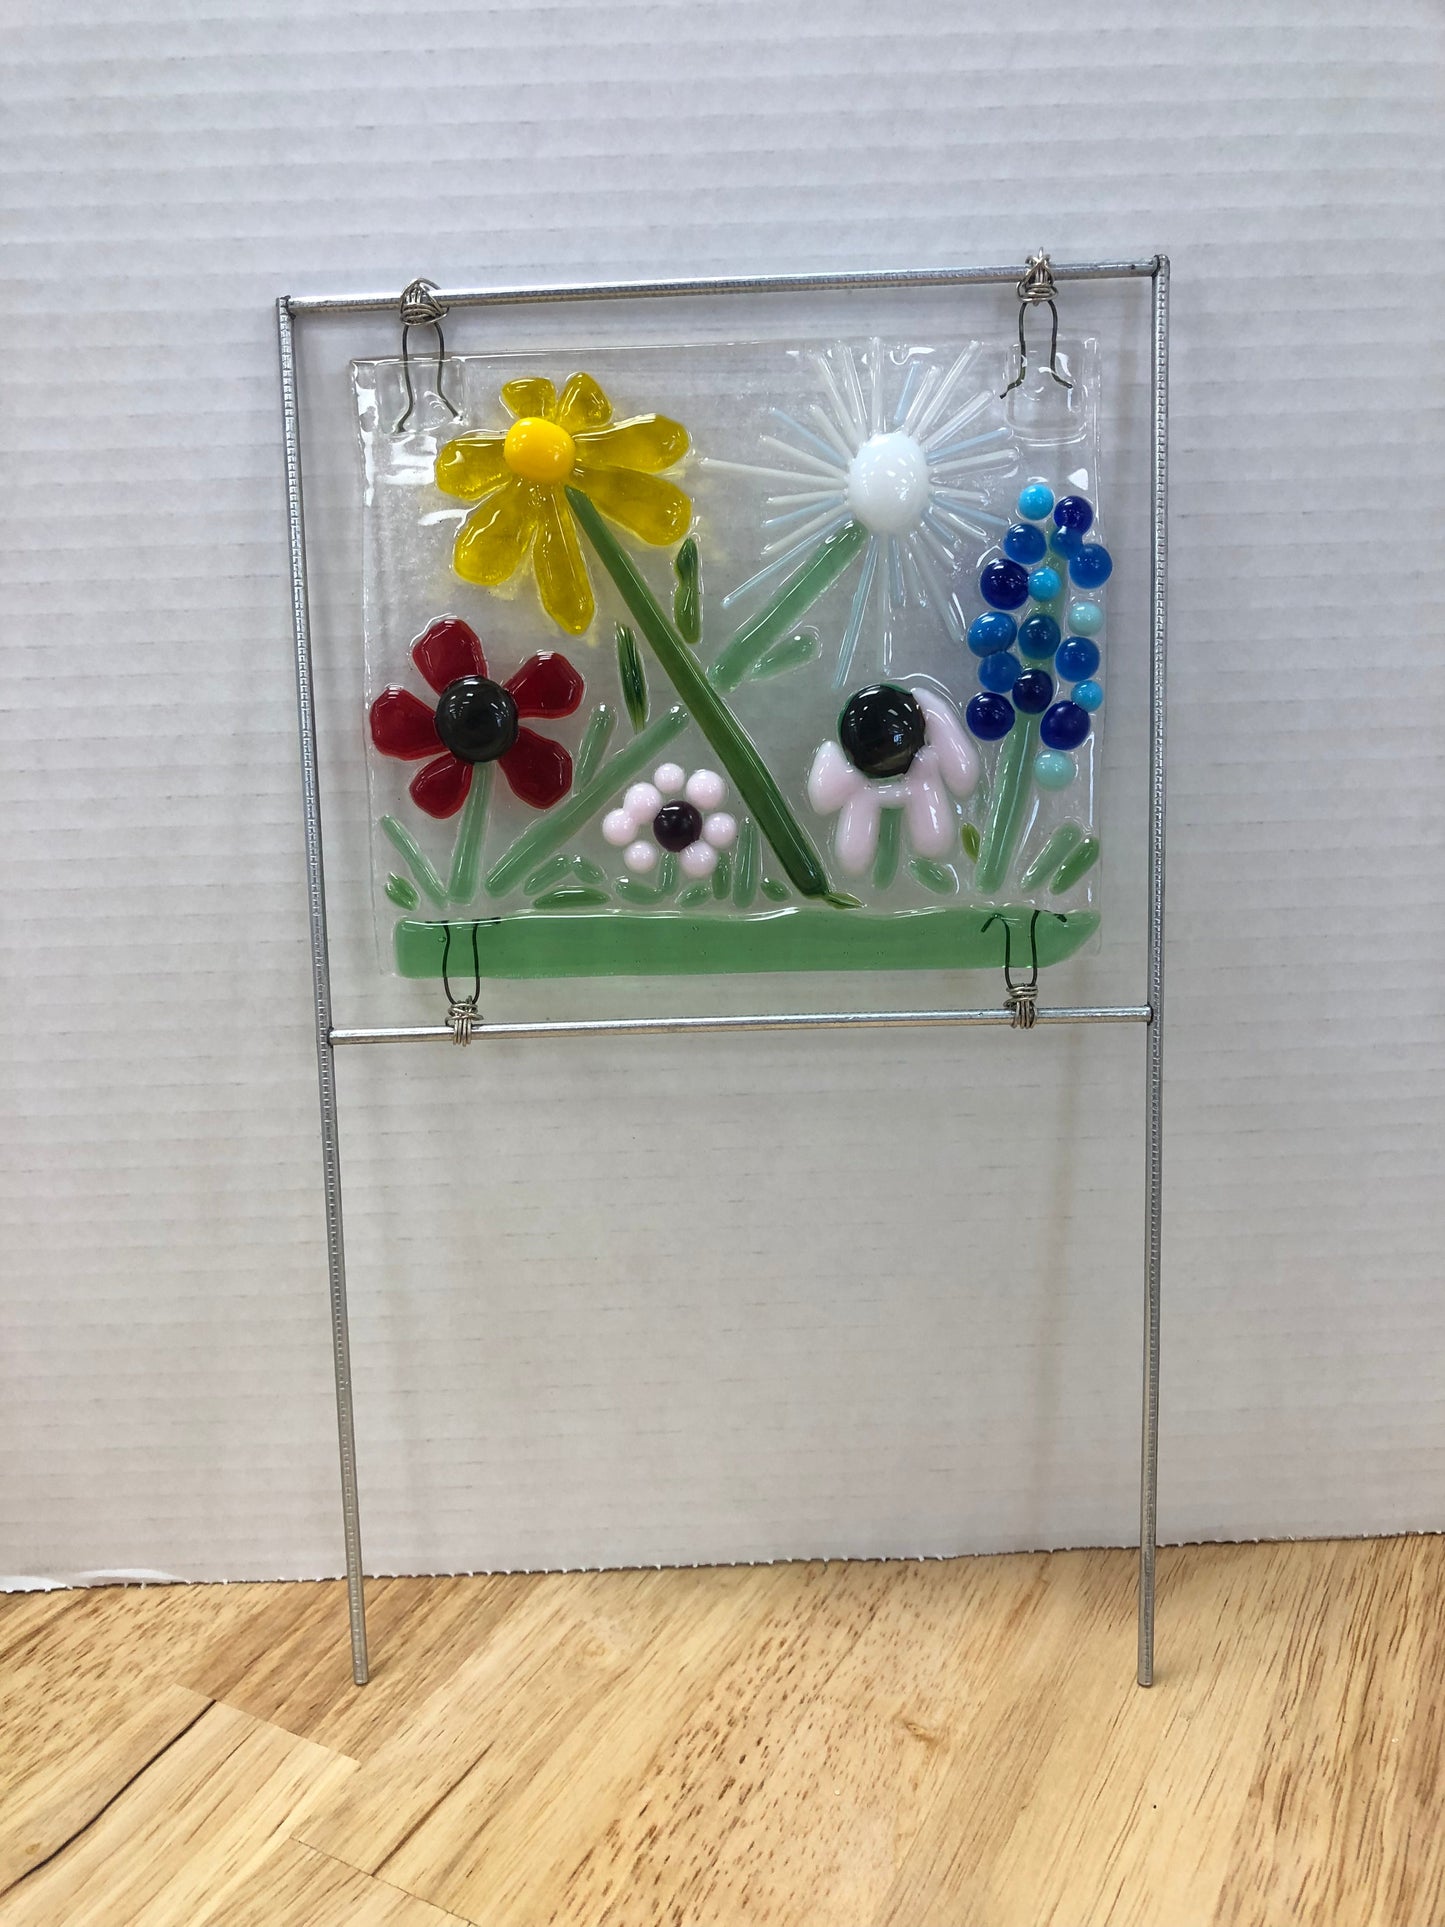 03/24/24 Fused Glass Garden Stake (Panel) 1:00-3:30pm